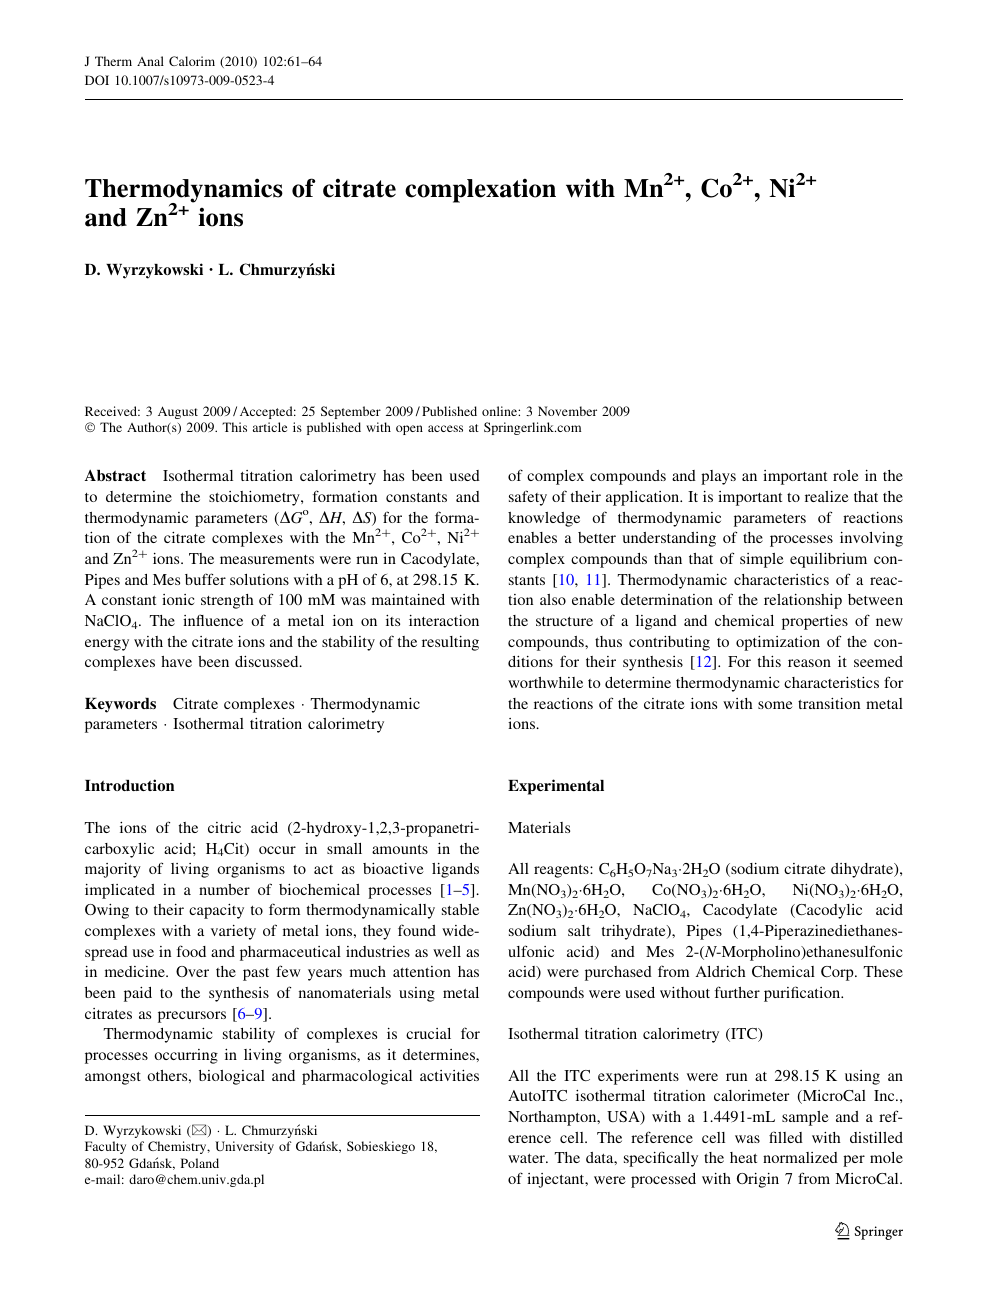 Thermodynamics Of Citrate Complexation With Mn2 Co2 Ni2 And Zn2 Ions Topic Of Research Paper In Chemical Sciences Download Scholarly Article Pdf And Read For Free On Cyberleninka Open Science Hub